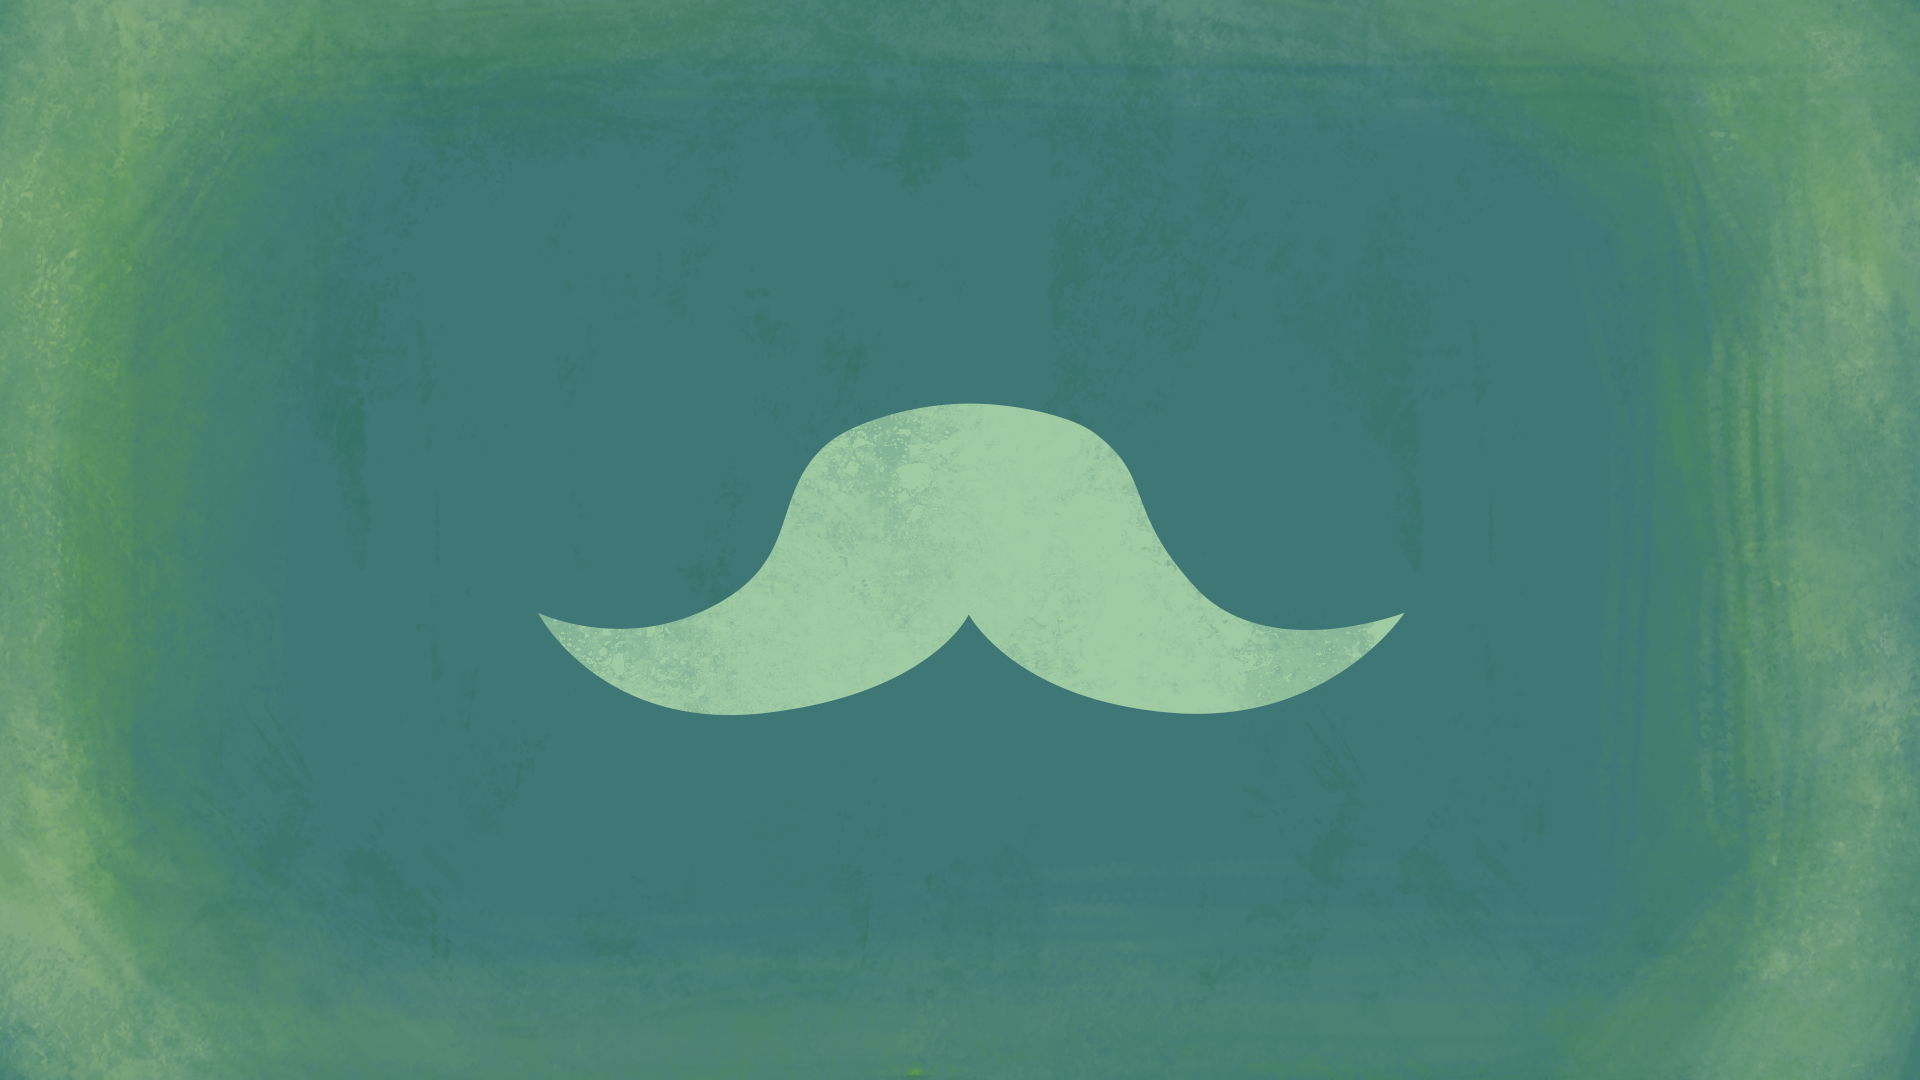 Icon for Hungarian moustache